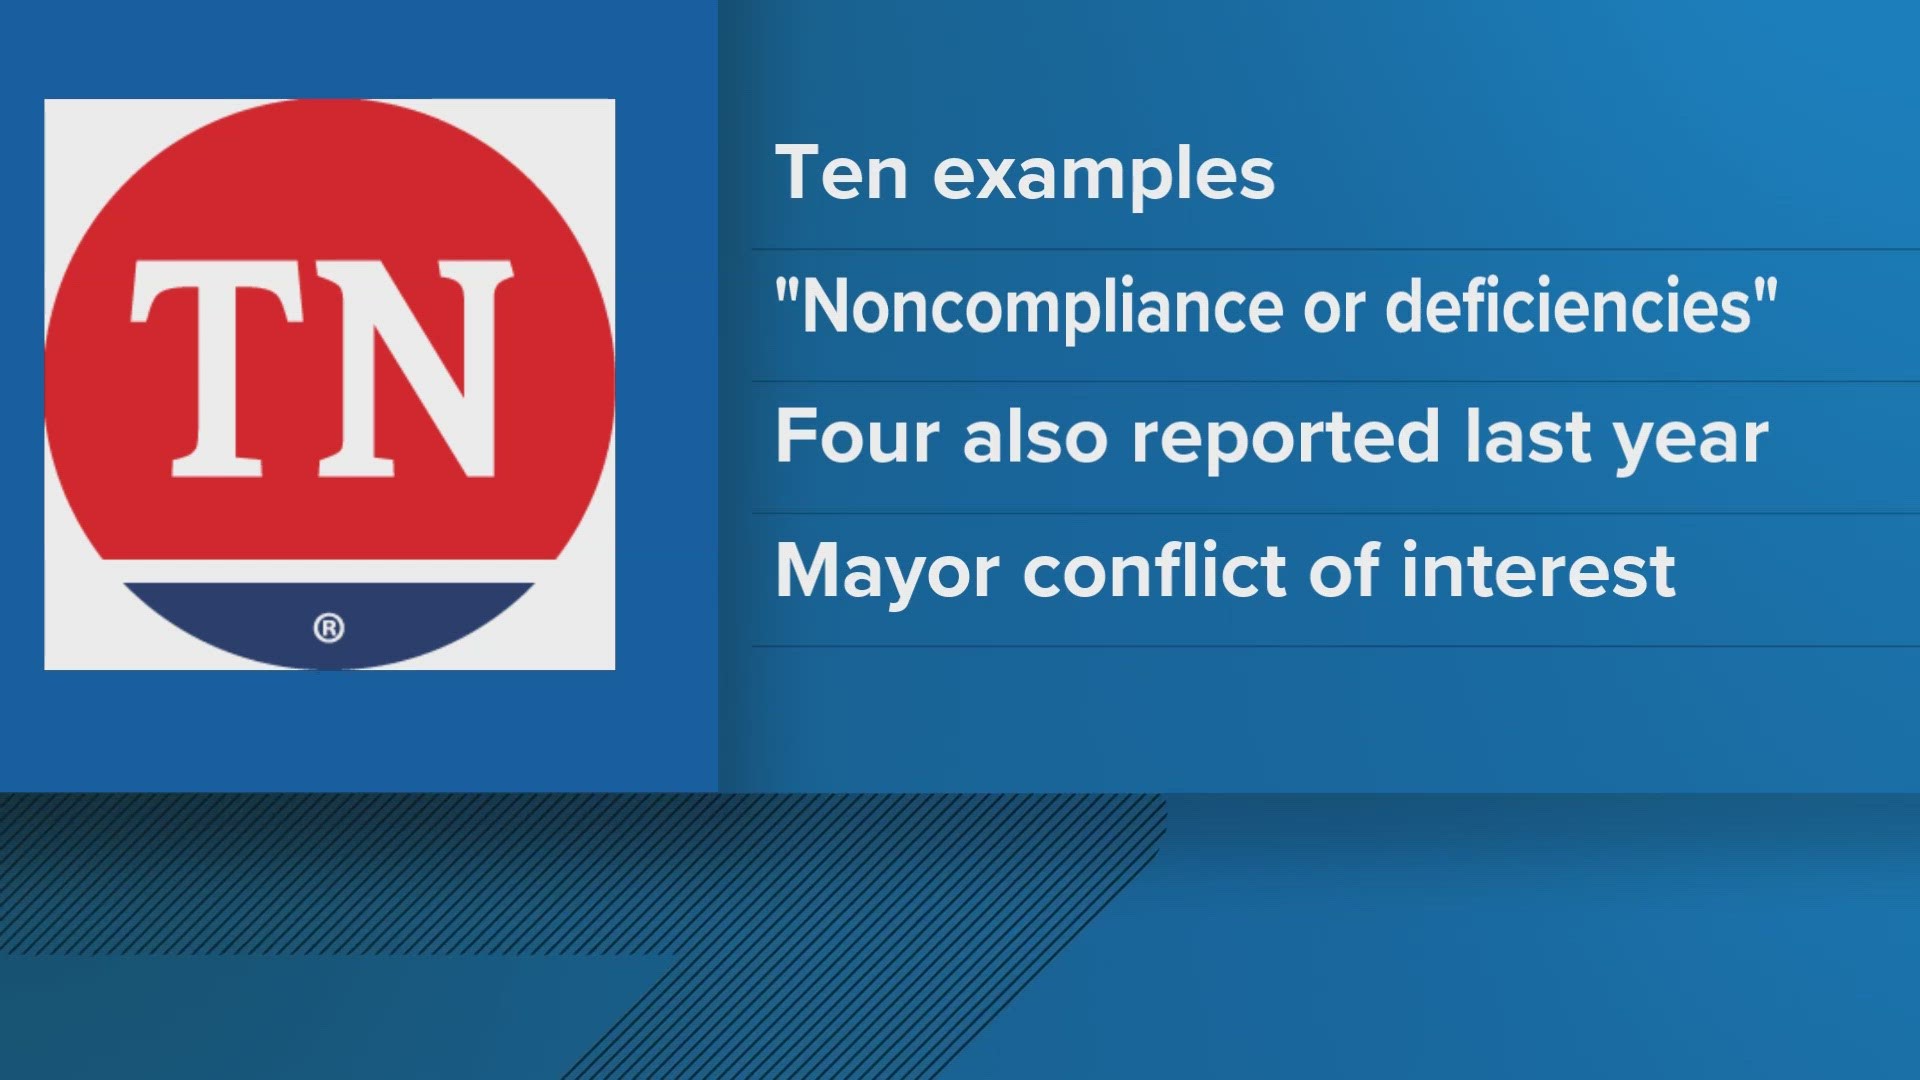 The comptroller’s office says it found 10 examples of "noncompliance" or "deficiencies" in county government officers.